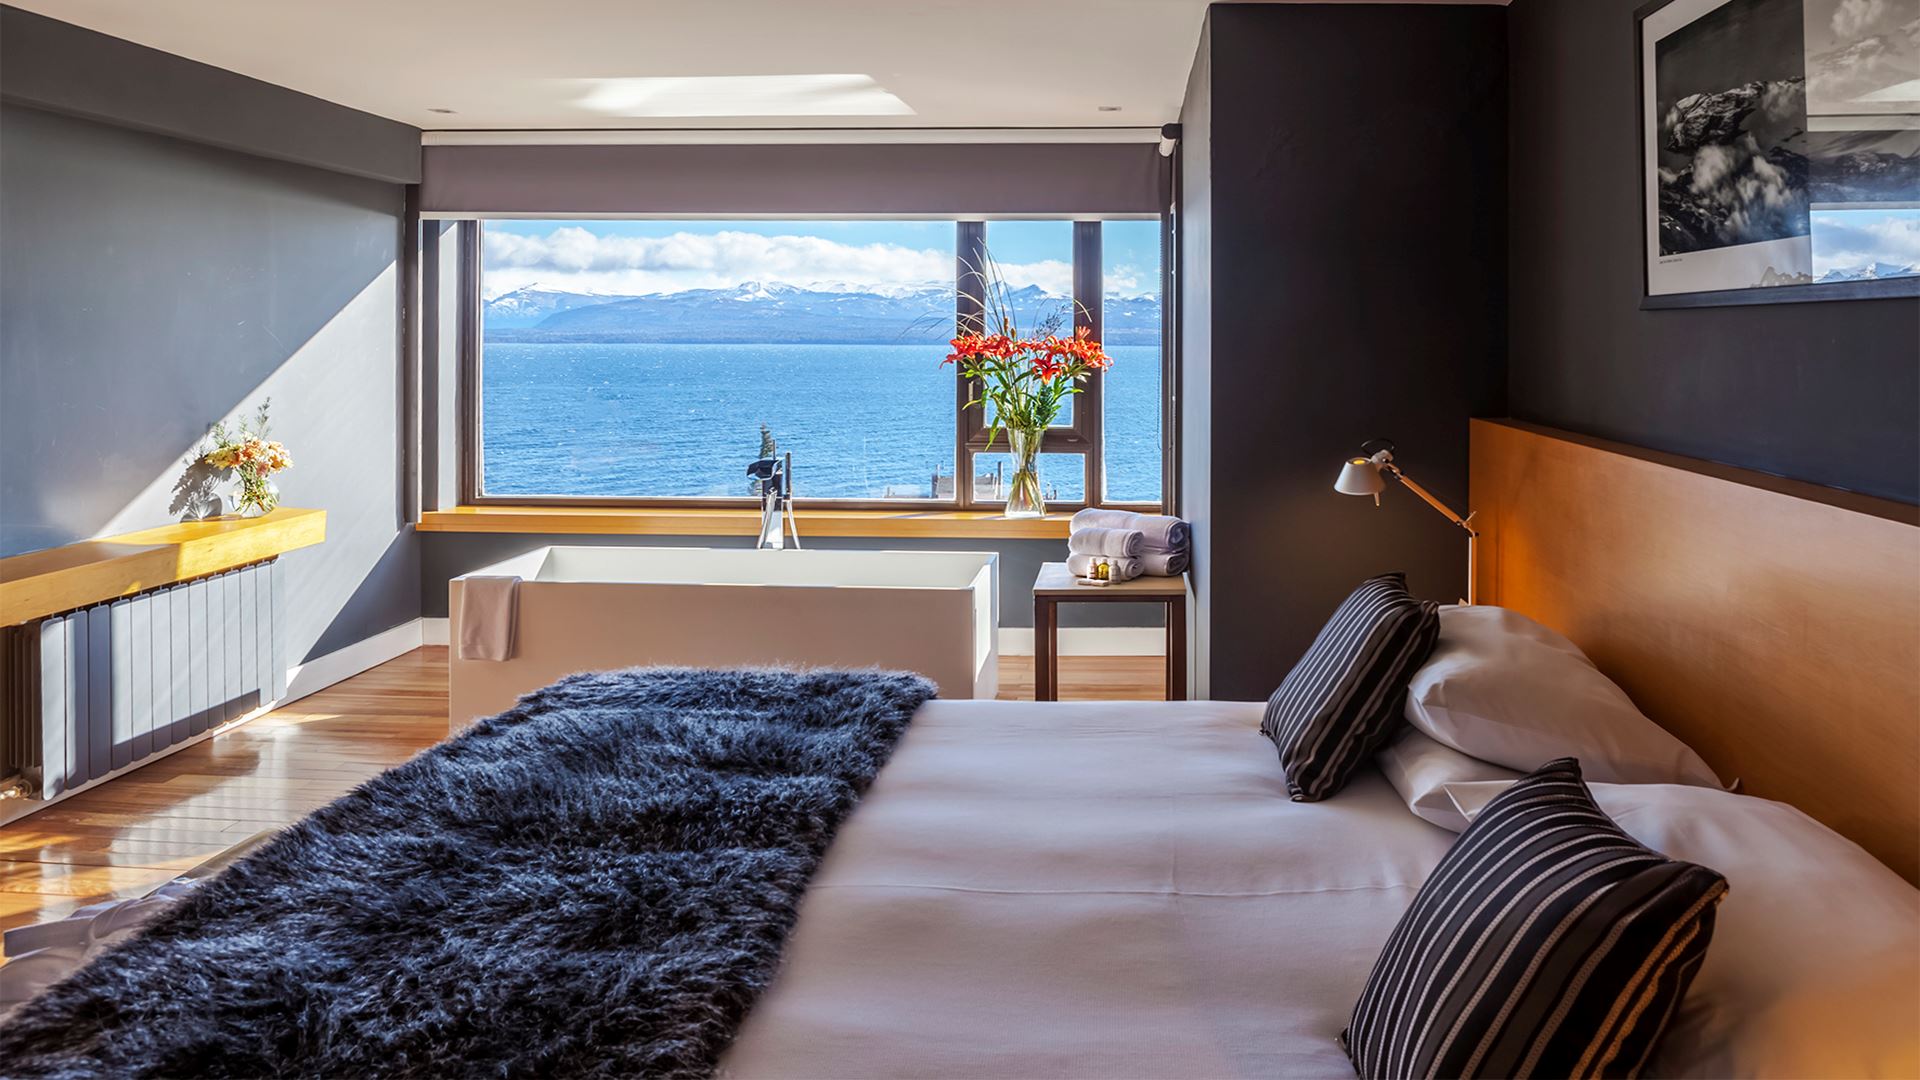 The 8 best hotels in Bariloche